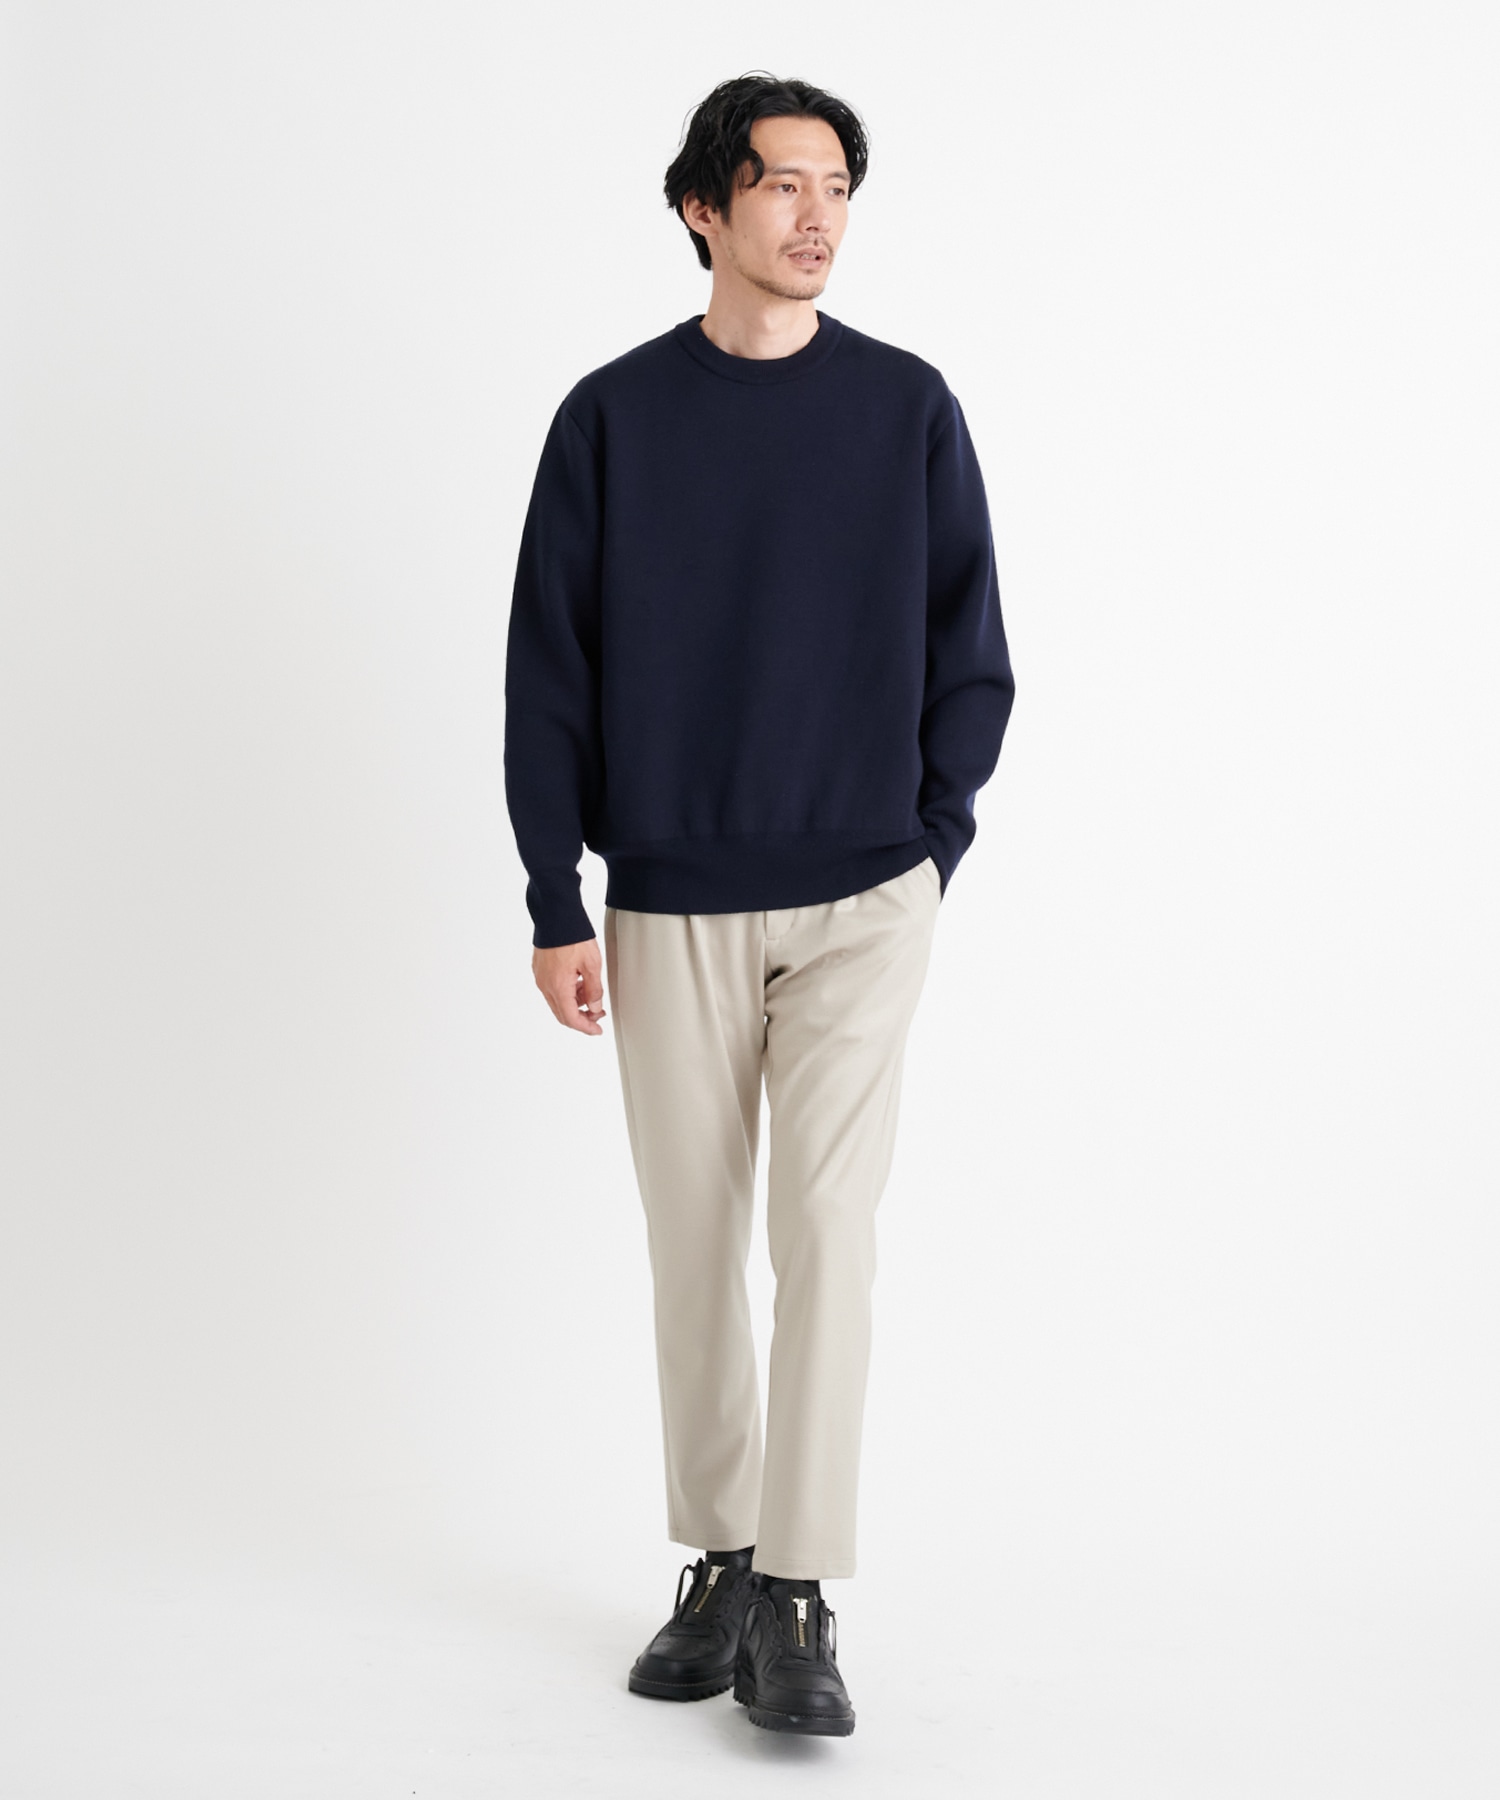 12G Ultimate Crew Neck Knit PO THE TOKYO